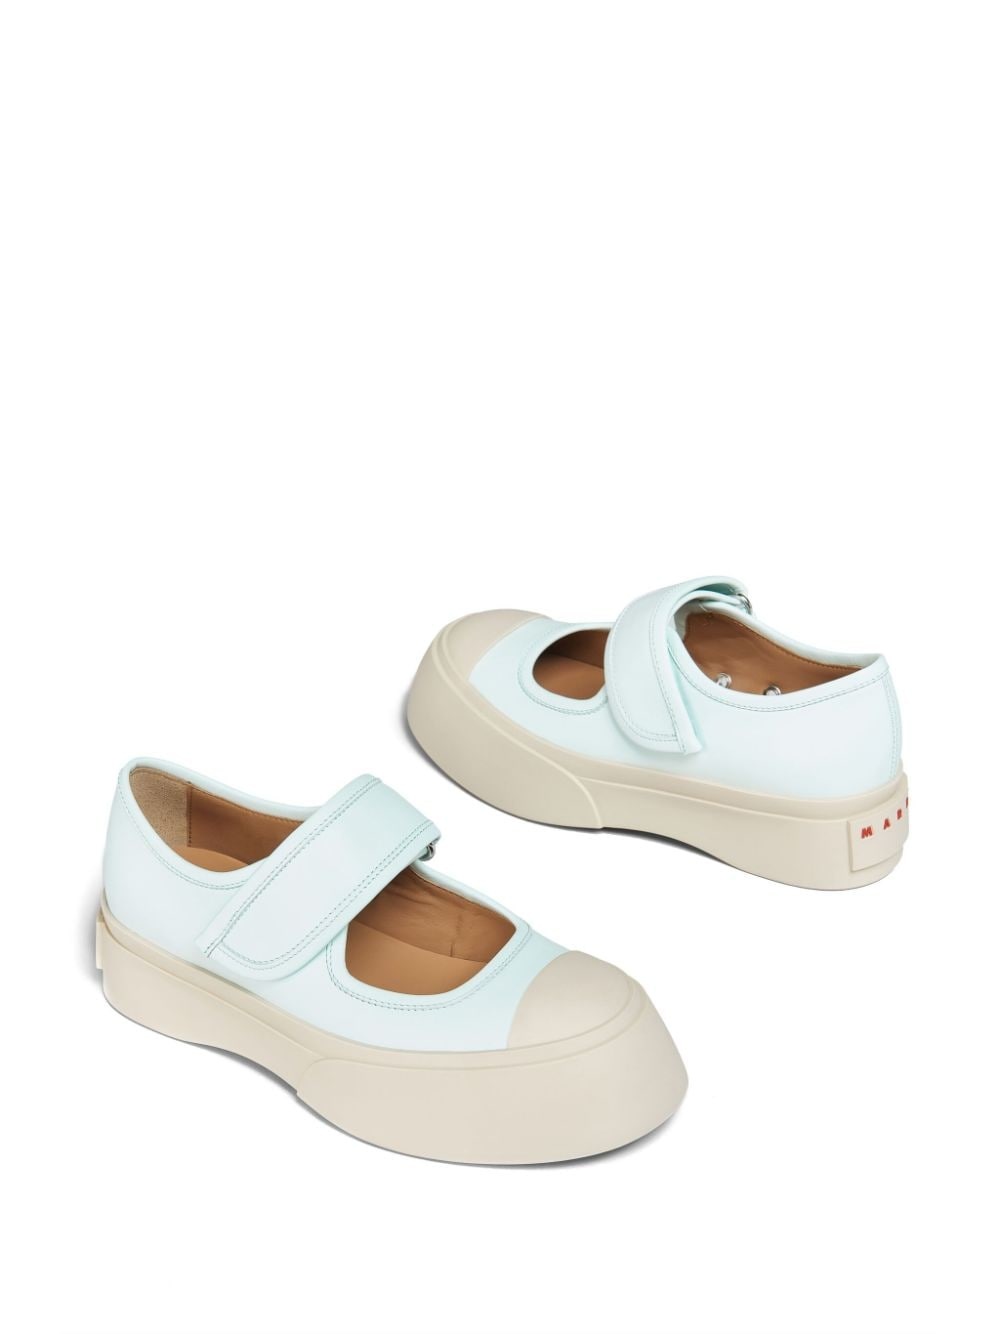 Pablo Mary Jane leather sneakers - 5